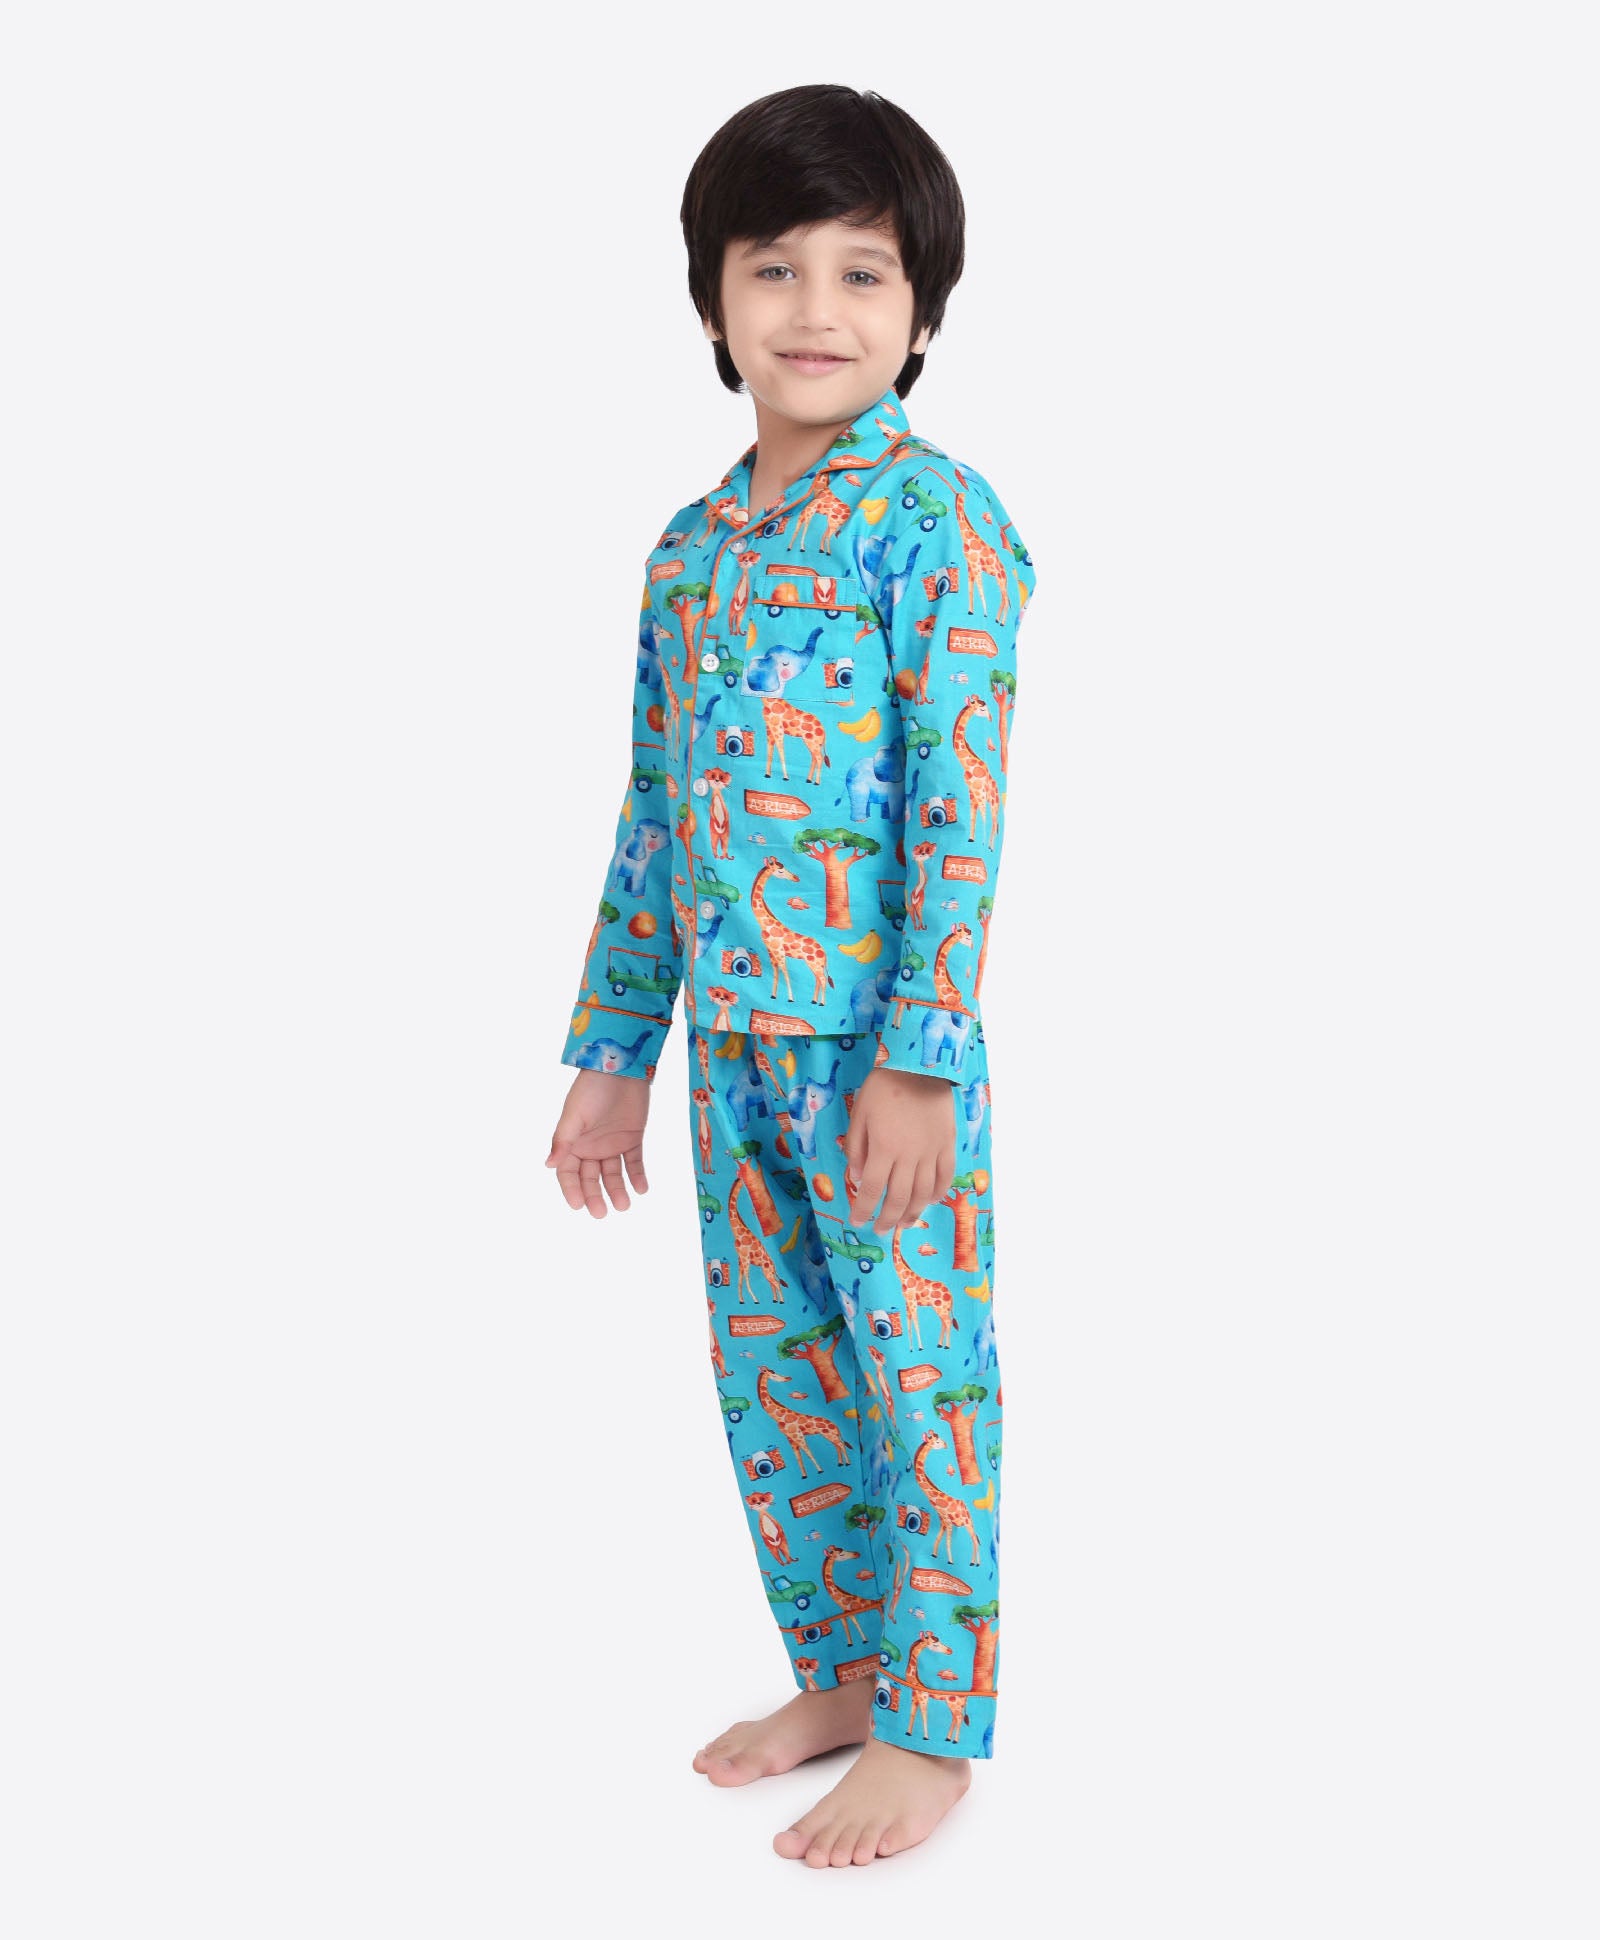 Unisex Donut Print Night suit for Girls or Boys White  biglilpeople